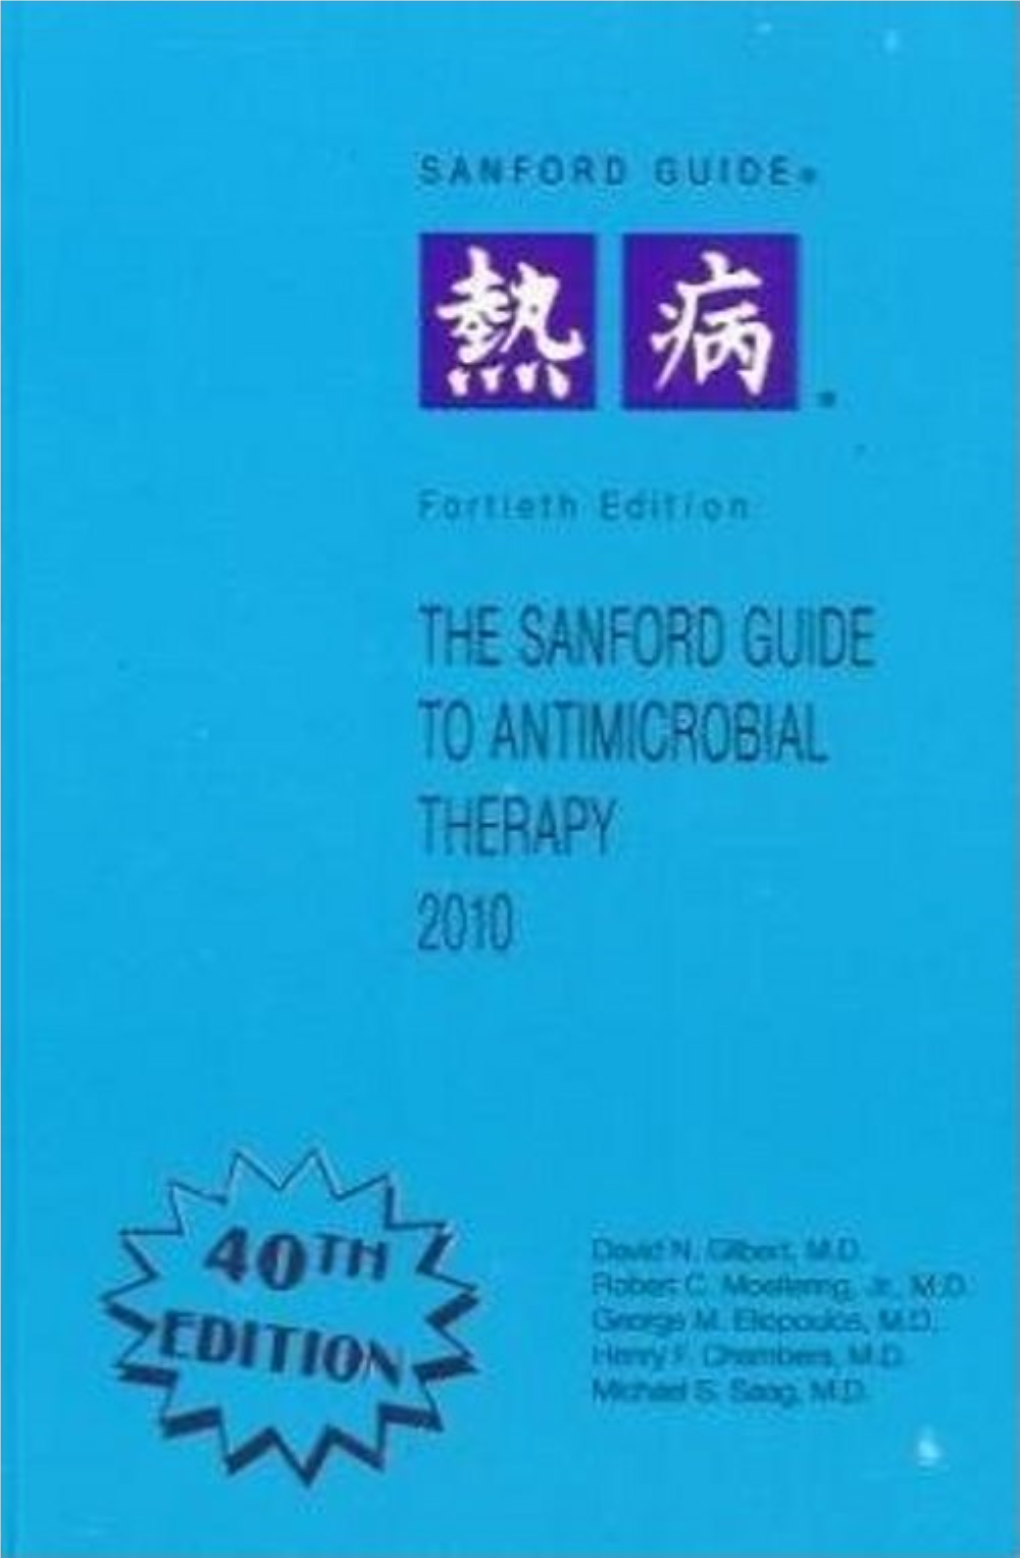 The Sanford Guide to Antimicrobial Therapy.Pdf